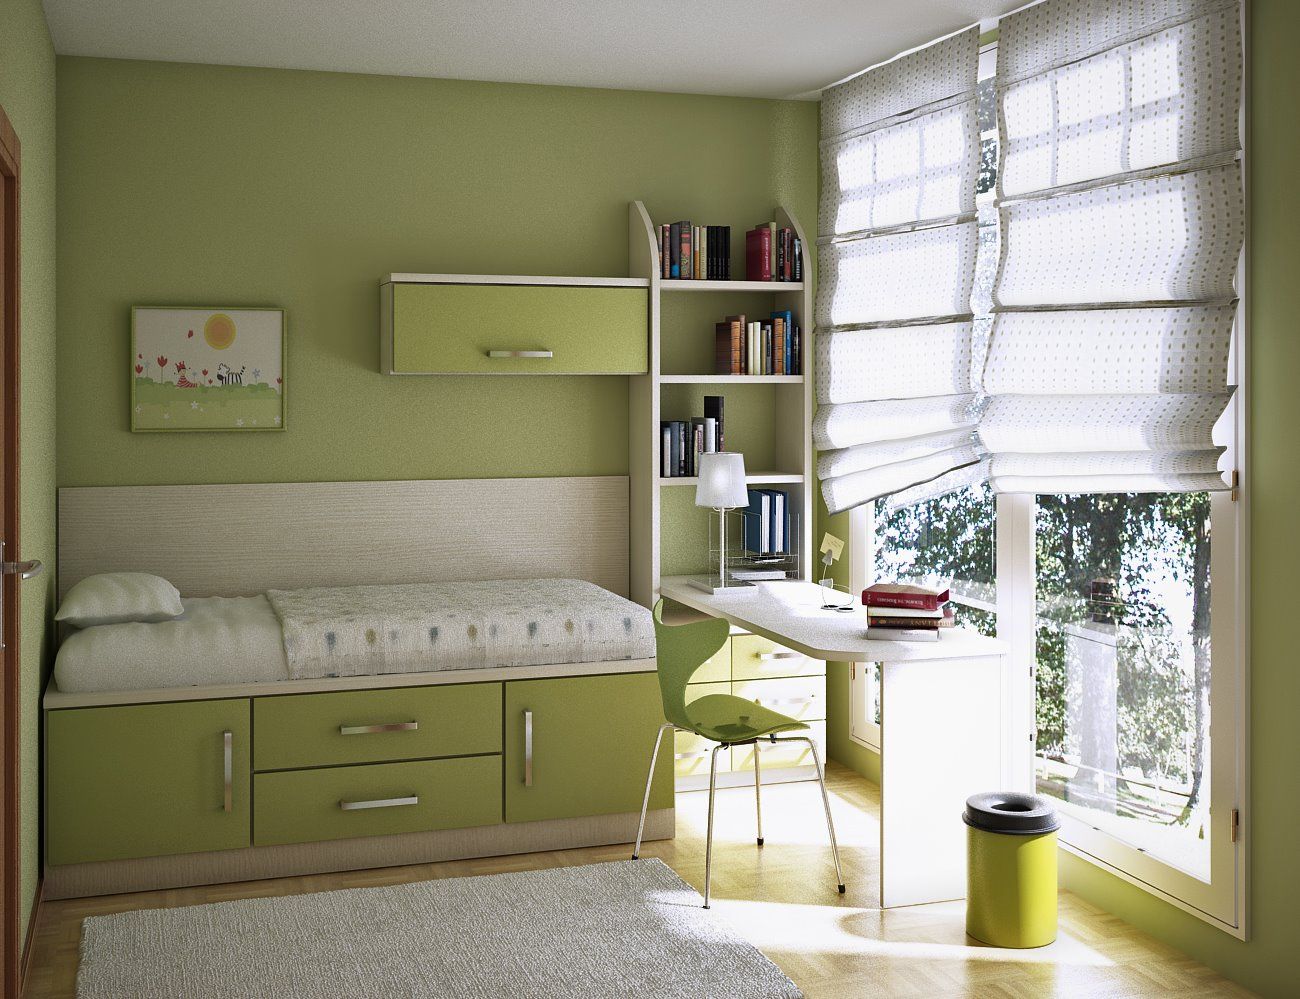 Green Wall Kids Dazzling Green Wall Color Of Kids Room Paint Ideas Completed With Single Bed On Platform Drawers And Furnished With Desk Combined With Cupboard Kids Room Colorful And Pattern Kids Room Paint Ideas